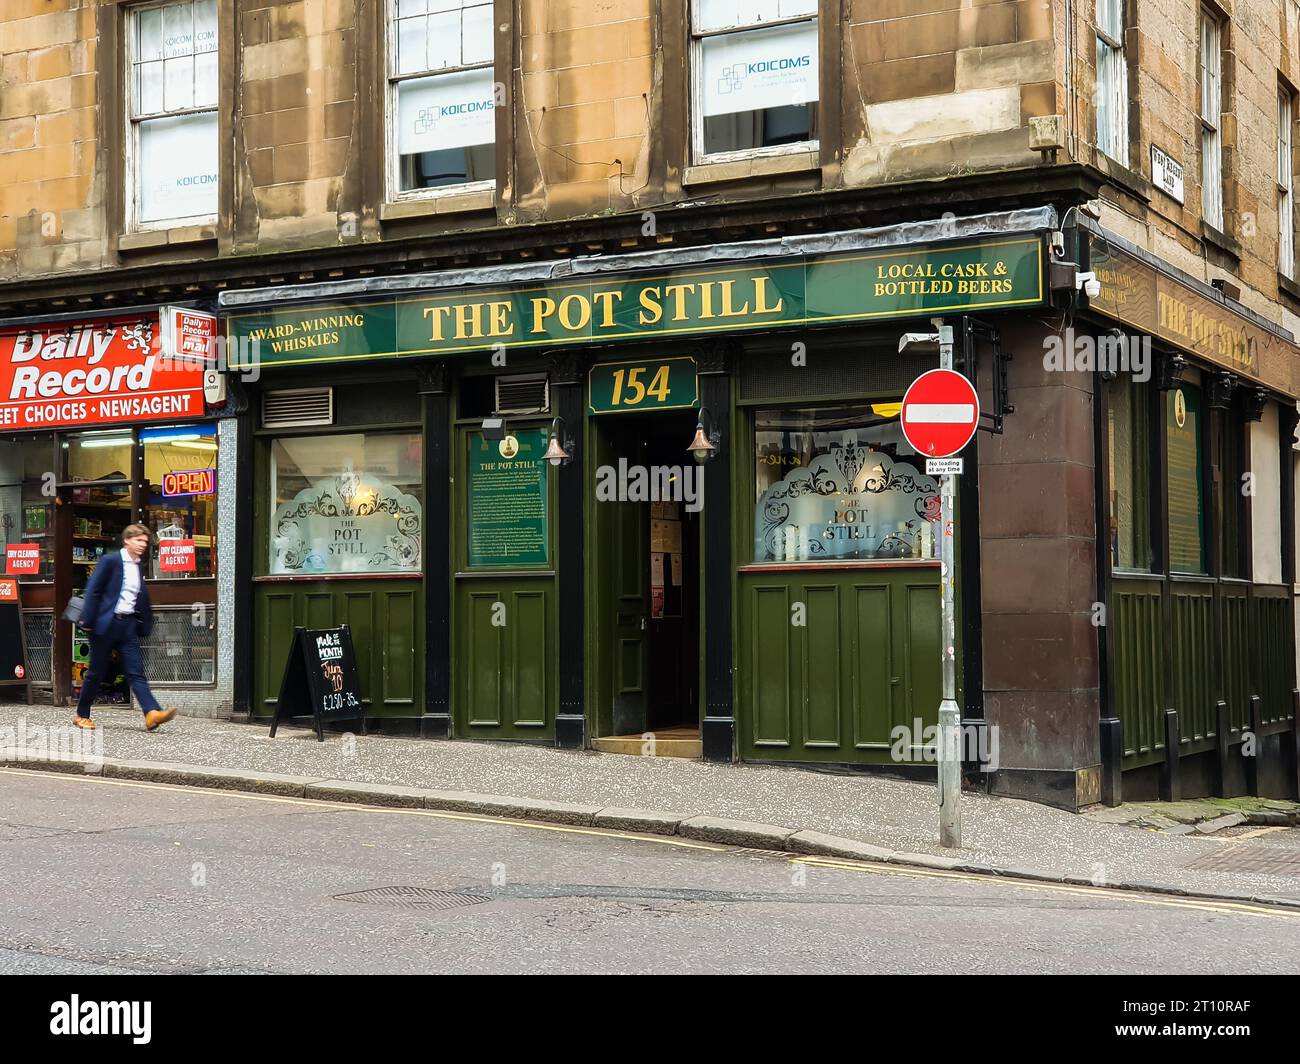 Glasgow, Lanarkshire / Scotland UK – 02 06 2020: The Pot Still Whisky Bar / Pub Glasgow, specialists in whisky who take pride in finding the customer' Stock Photo